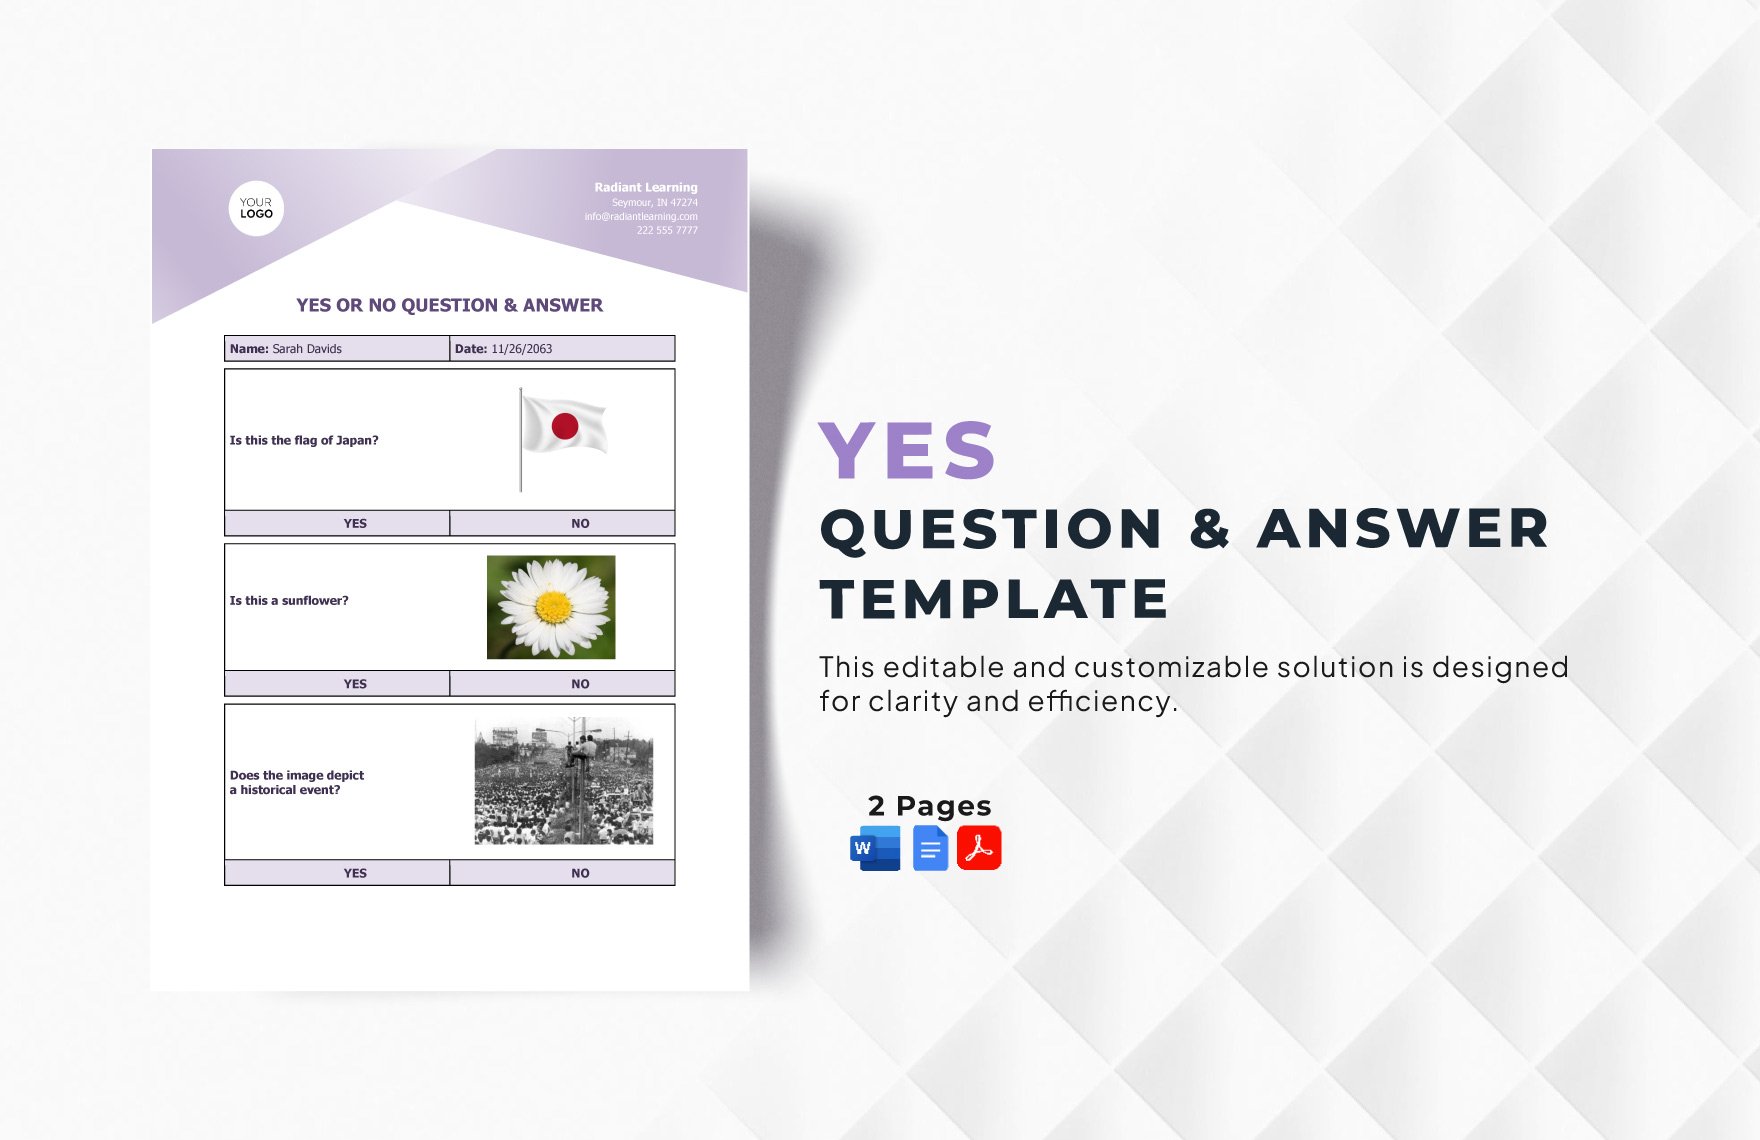 Yes or No Question & Answer Template